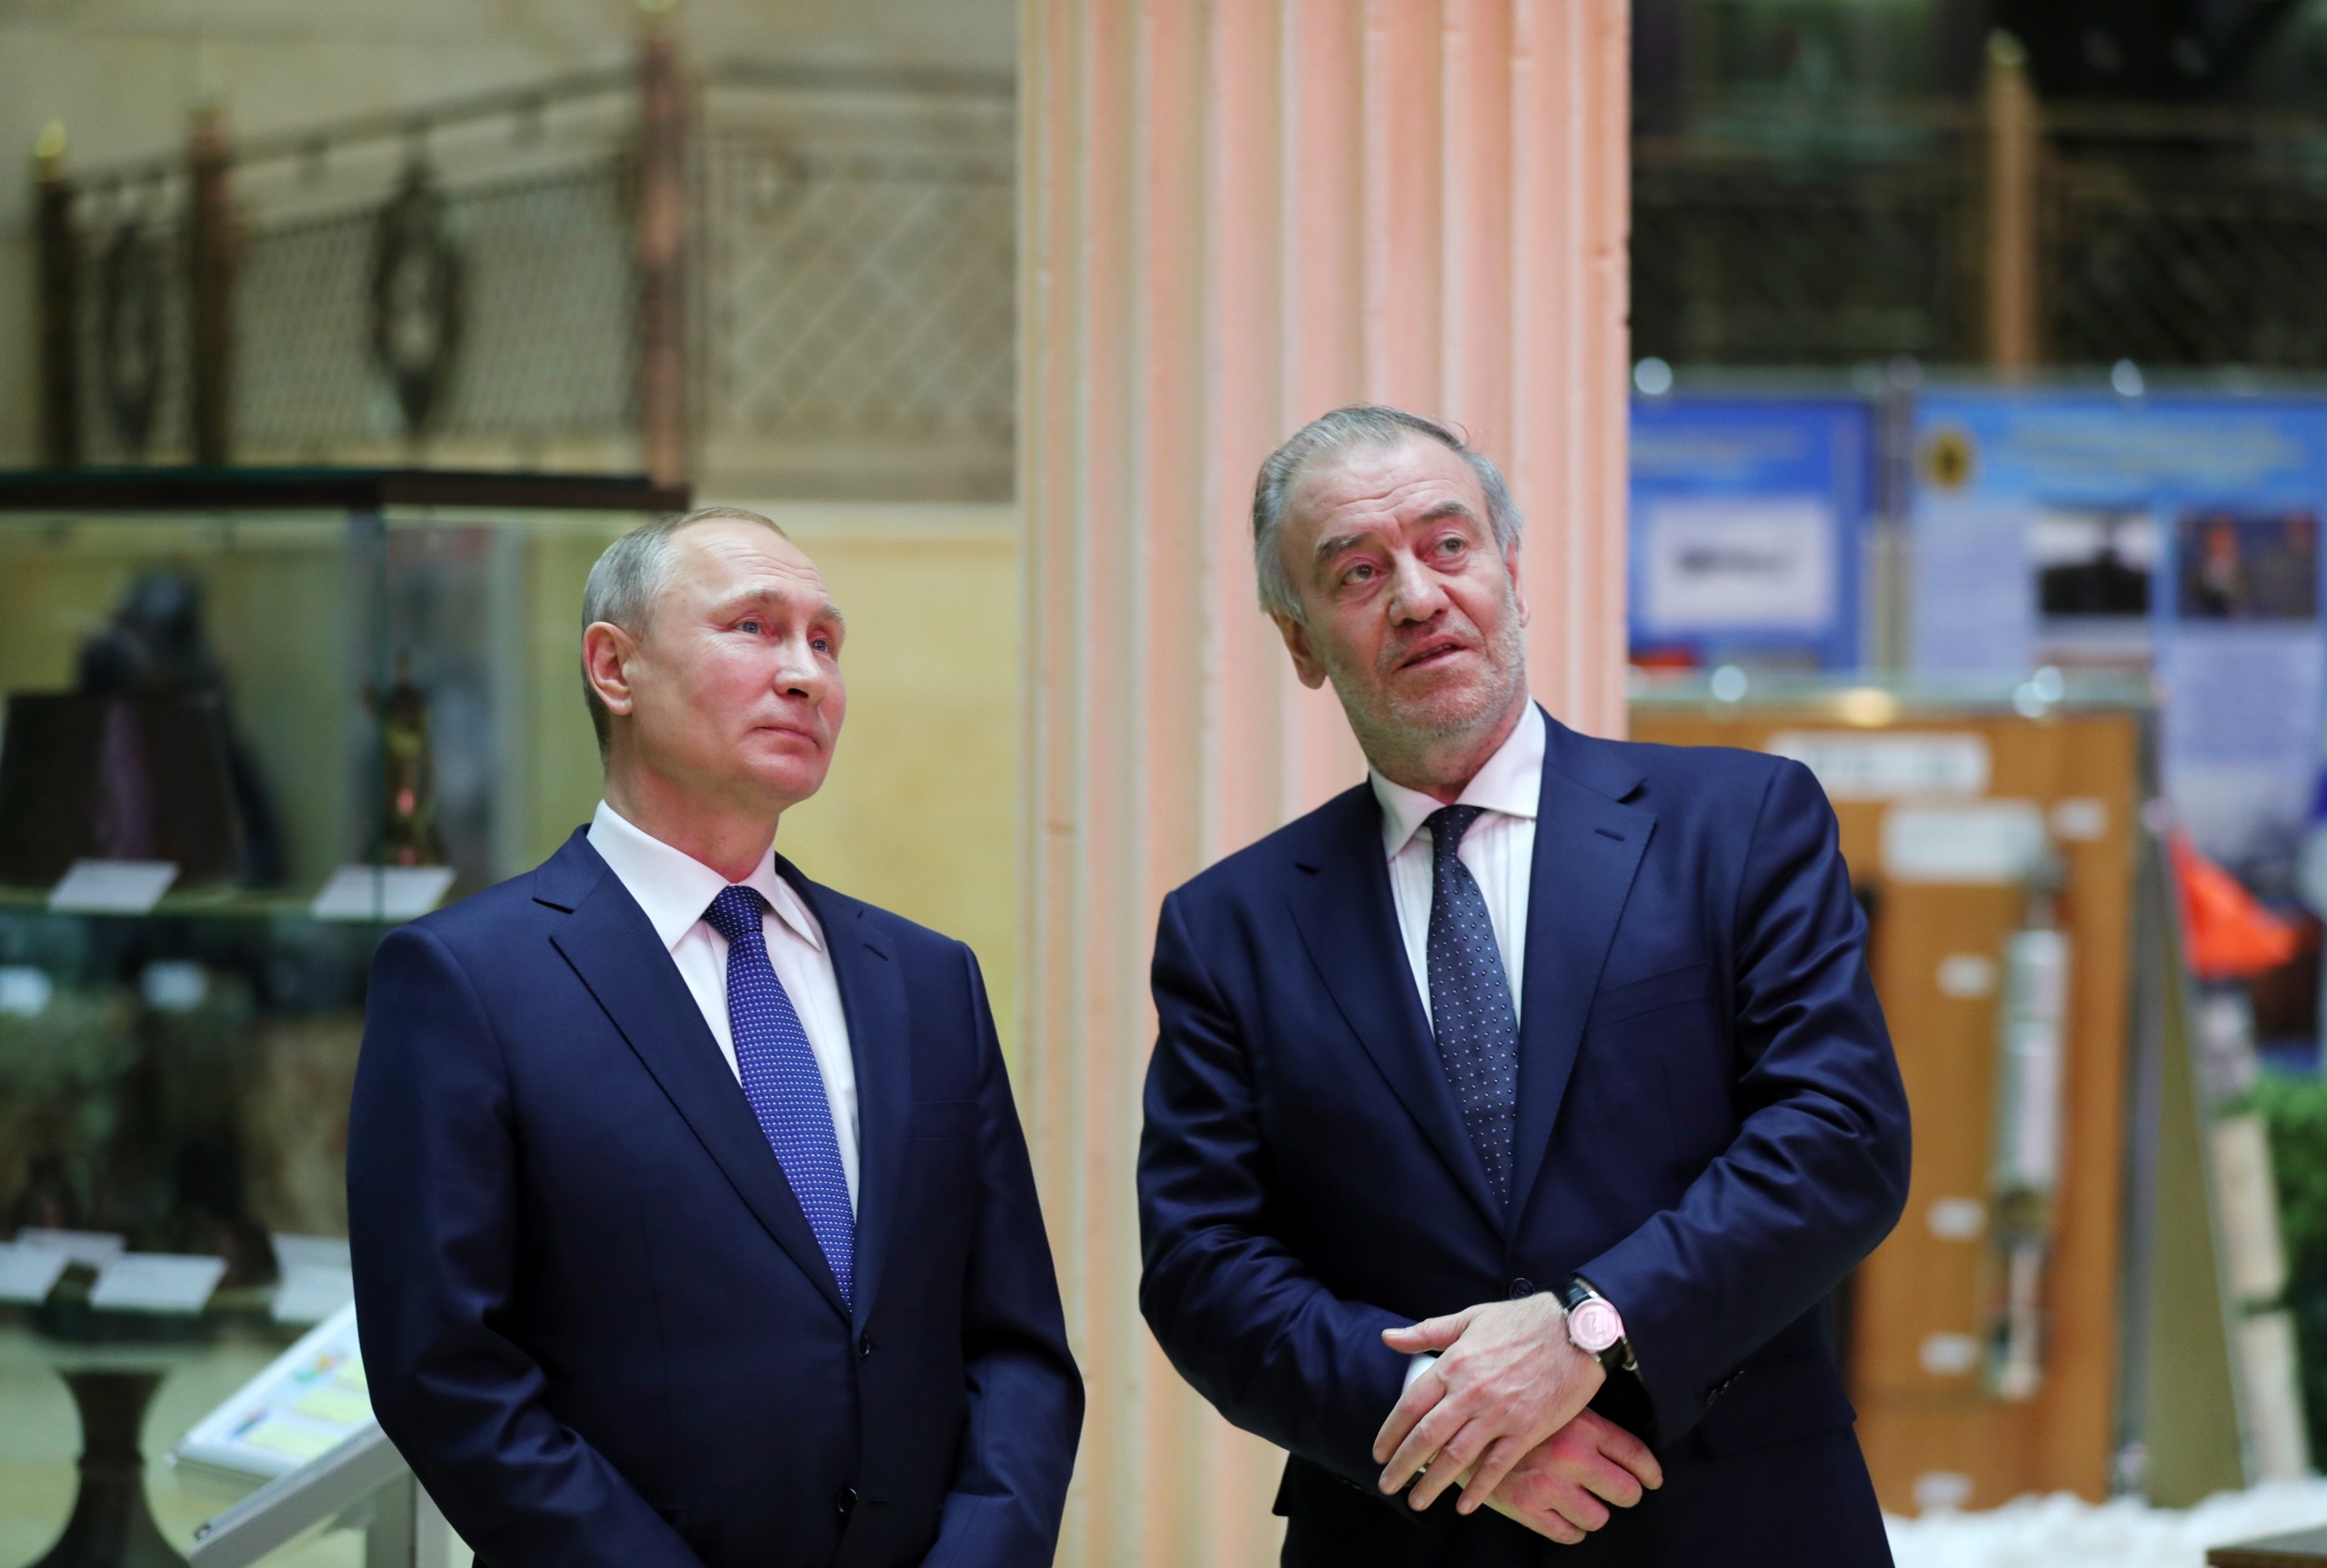 epa09793398 (FILE) - Russian President Vladimir Putin (L) and Mariinsky Theatre artistic director Valery Gergiev (R) attend an exhibition as part of a military-practical conference on the outcome of the special operation in Syria, at Russia's National Defense Control Center in Moscow, Russia, 30 January 2018 (reissued 01 March 2022). Munich Mayor Reiter has removed  Russian conductor Valery Gergiev from the role of Chief Conductor of the Munich Philharmonic, a statement by the mayor reads on 01 March 2022. "Valery Gergiev has not spoken out despite my call to 'clearly and unequivocally distance himself from the brutal war of aggression that Putin is waging against Ukraine and now in particular against our twin city of Kyiv," the mayor explains his decision. Russian troops entered Ukraine on 24 February prompting the country's president to declare martial law and triggering a series of severe economic sanctions imposed by Western countries on Russia.  EPA/MICHAEL KLIMENTYEV / SPUTNIK / K MANDATORY CREDIT *** Local Caption *** 54077450